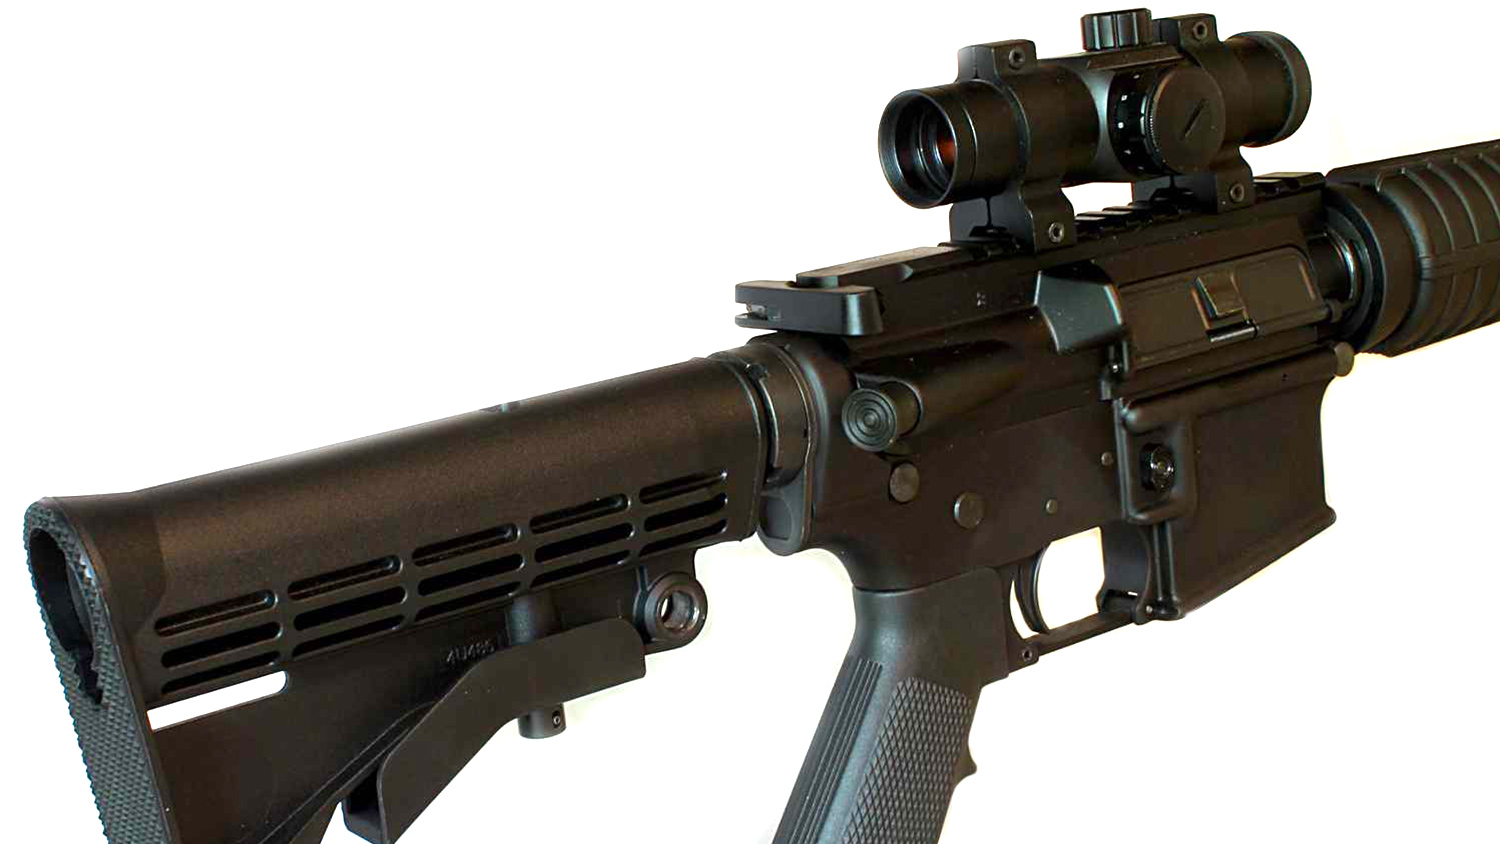 Optics and collapsible stocks for service rifle